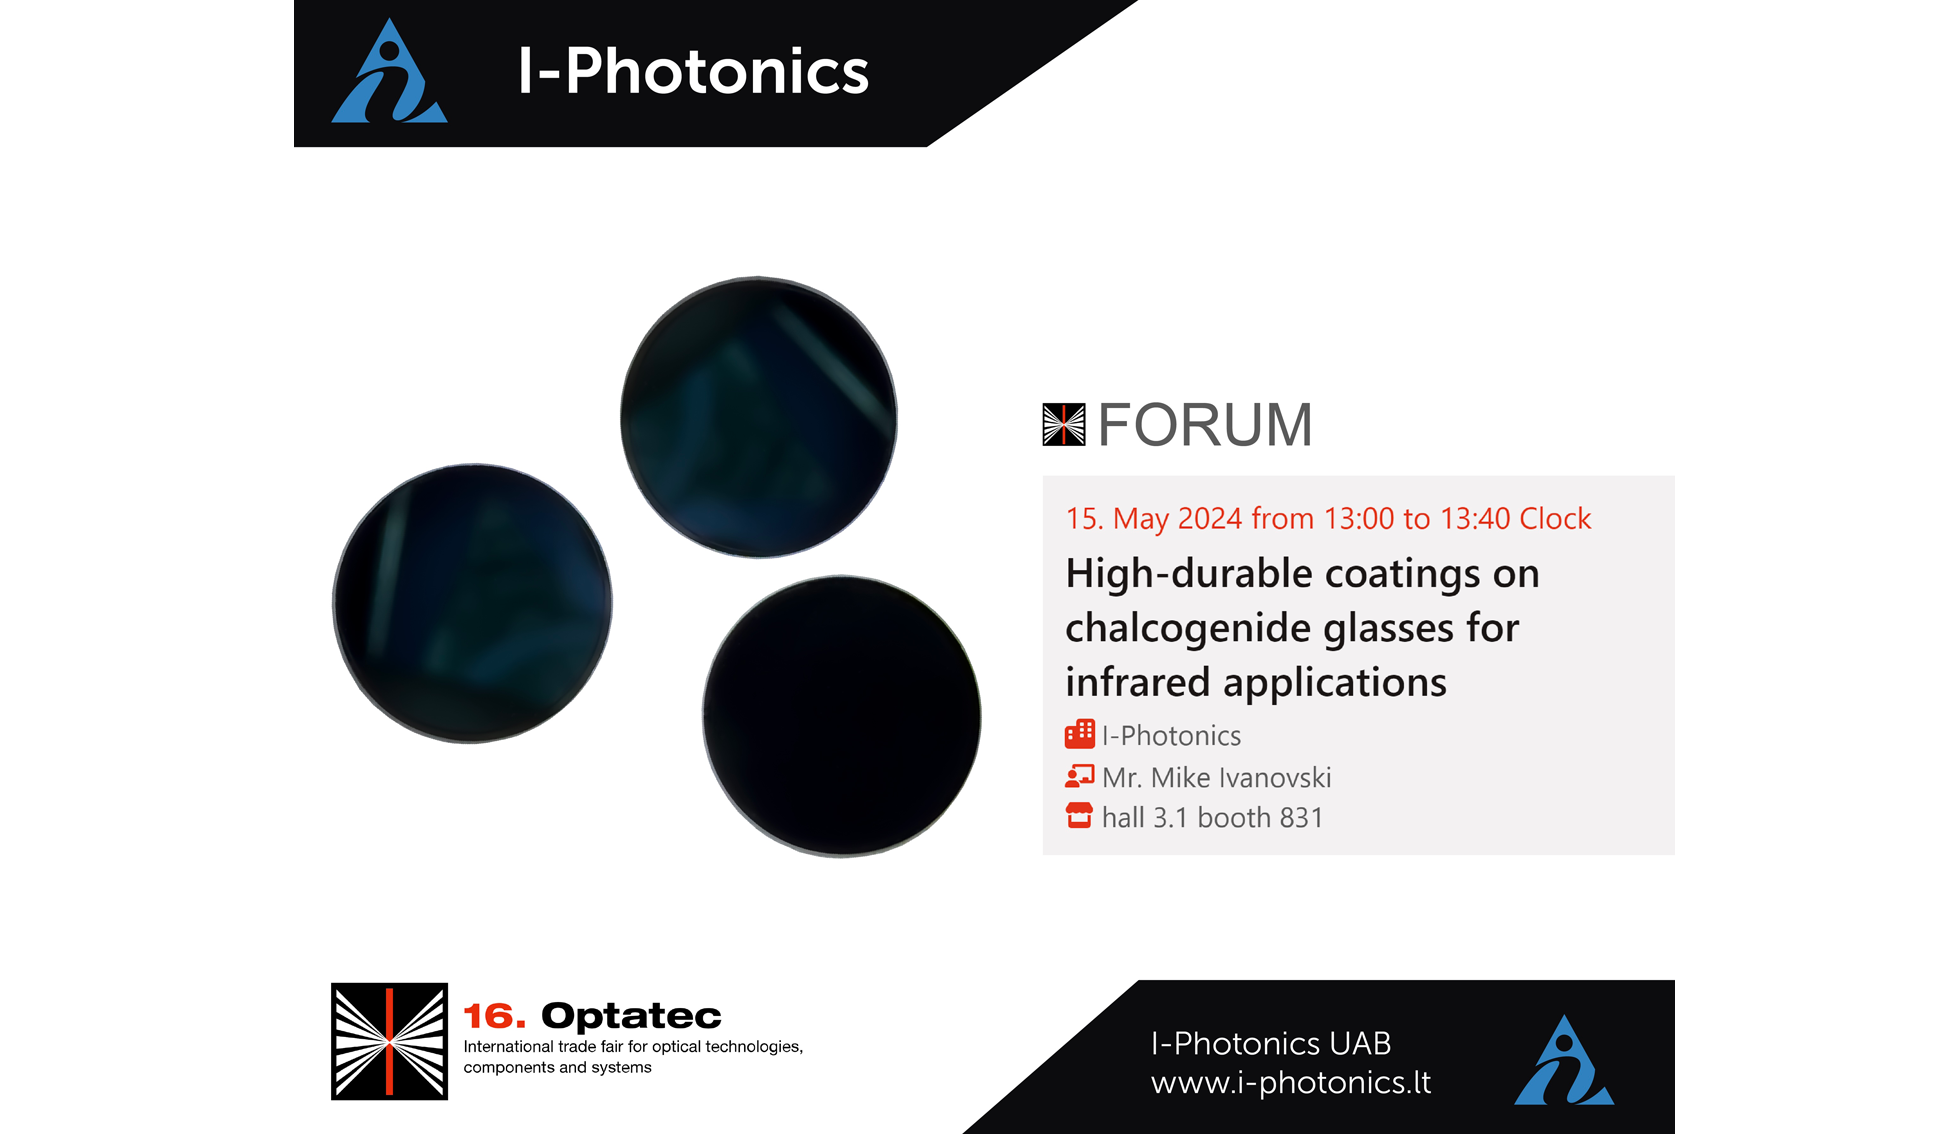 Highdurable coatings on chalcogenide glasses for infrared applications at Optatec 2024!